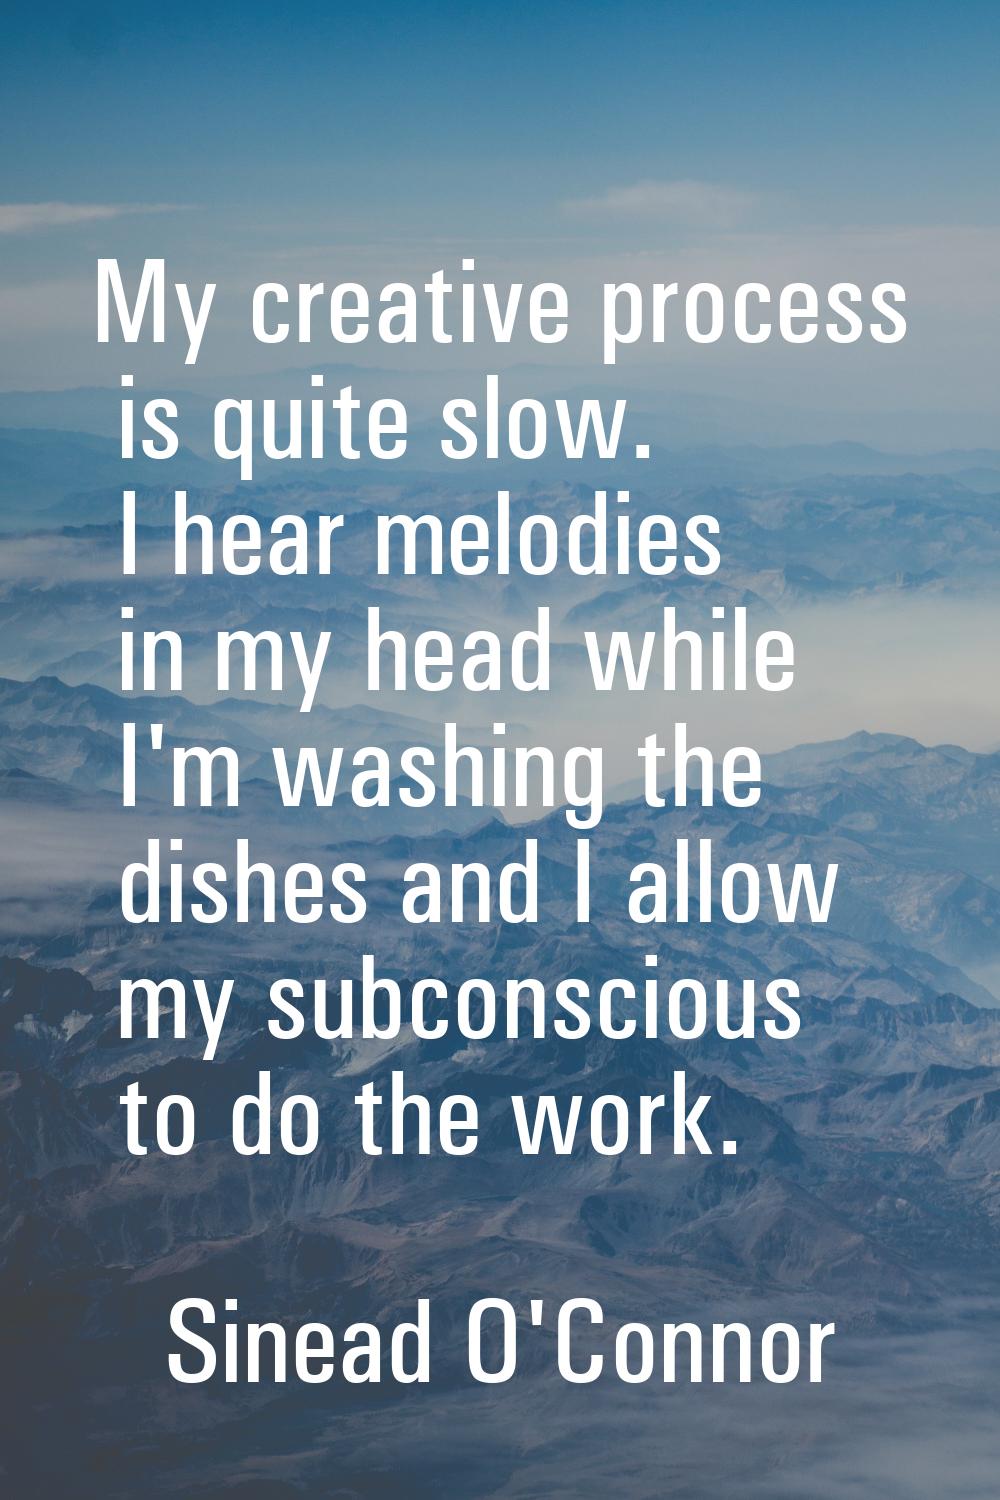 My creative process is quite slow. I hear melodies in my head while I'm washing the dishes and I al